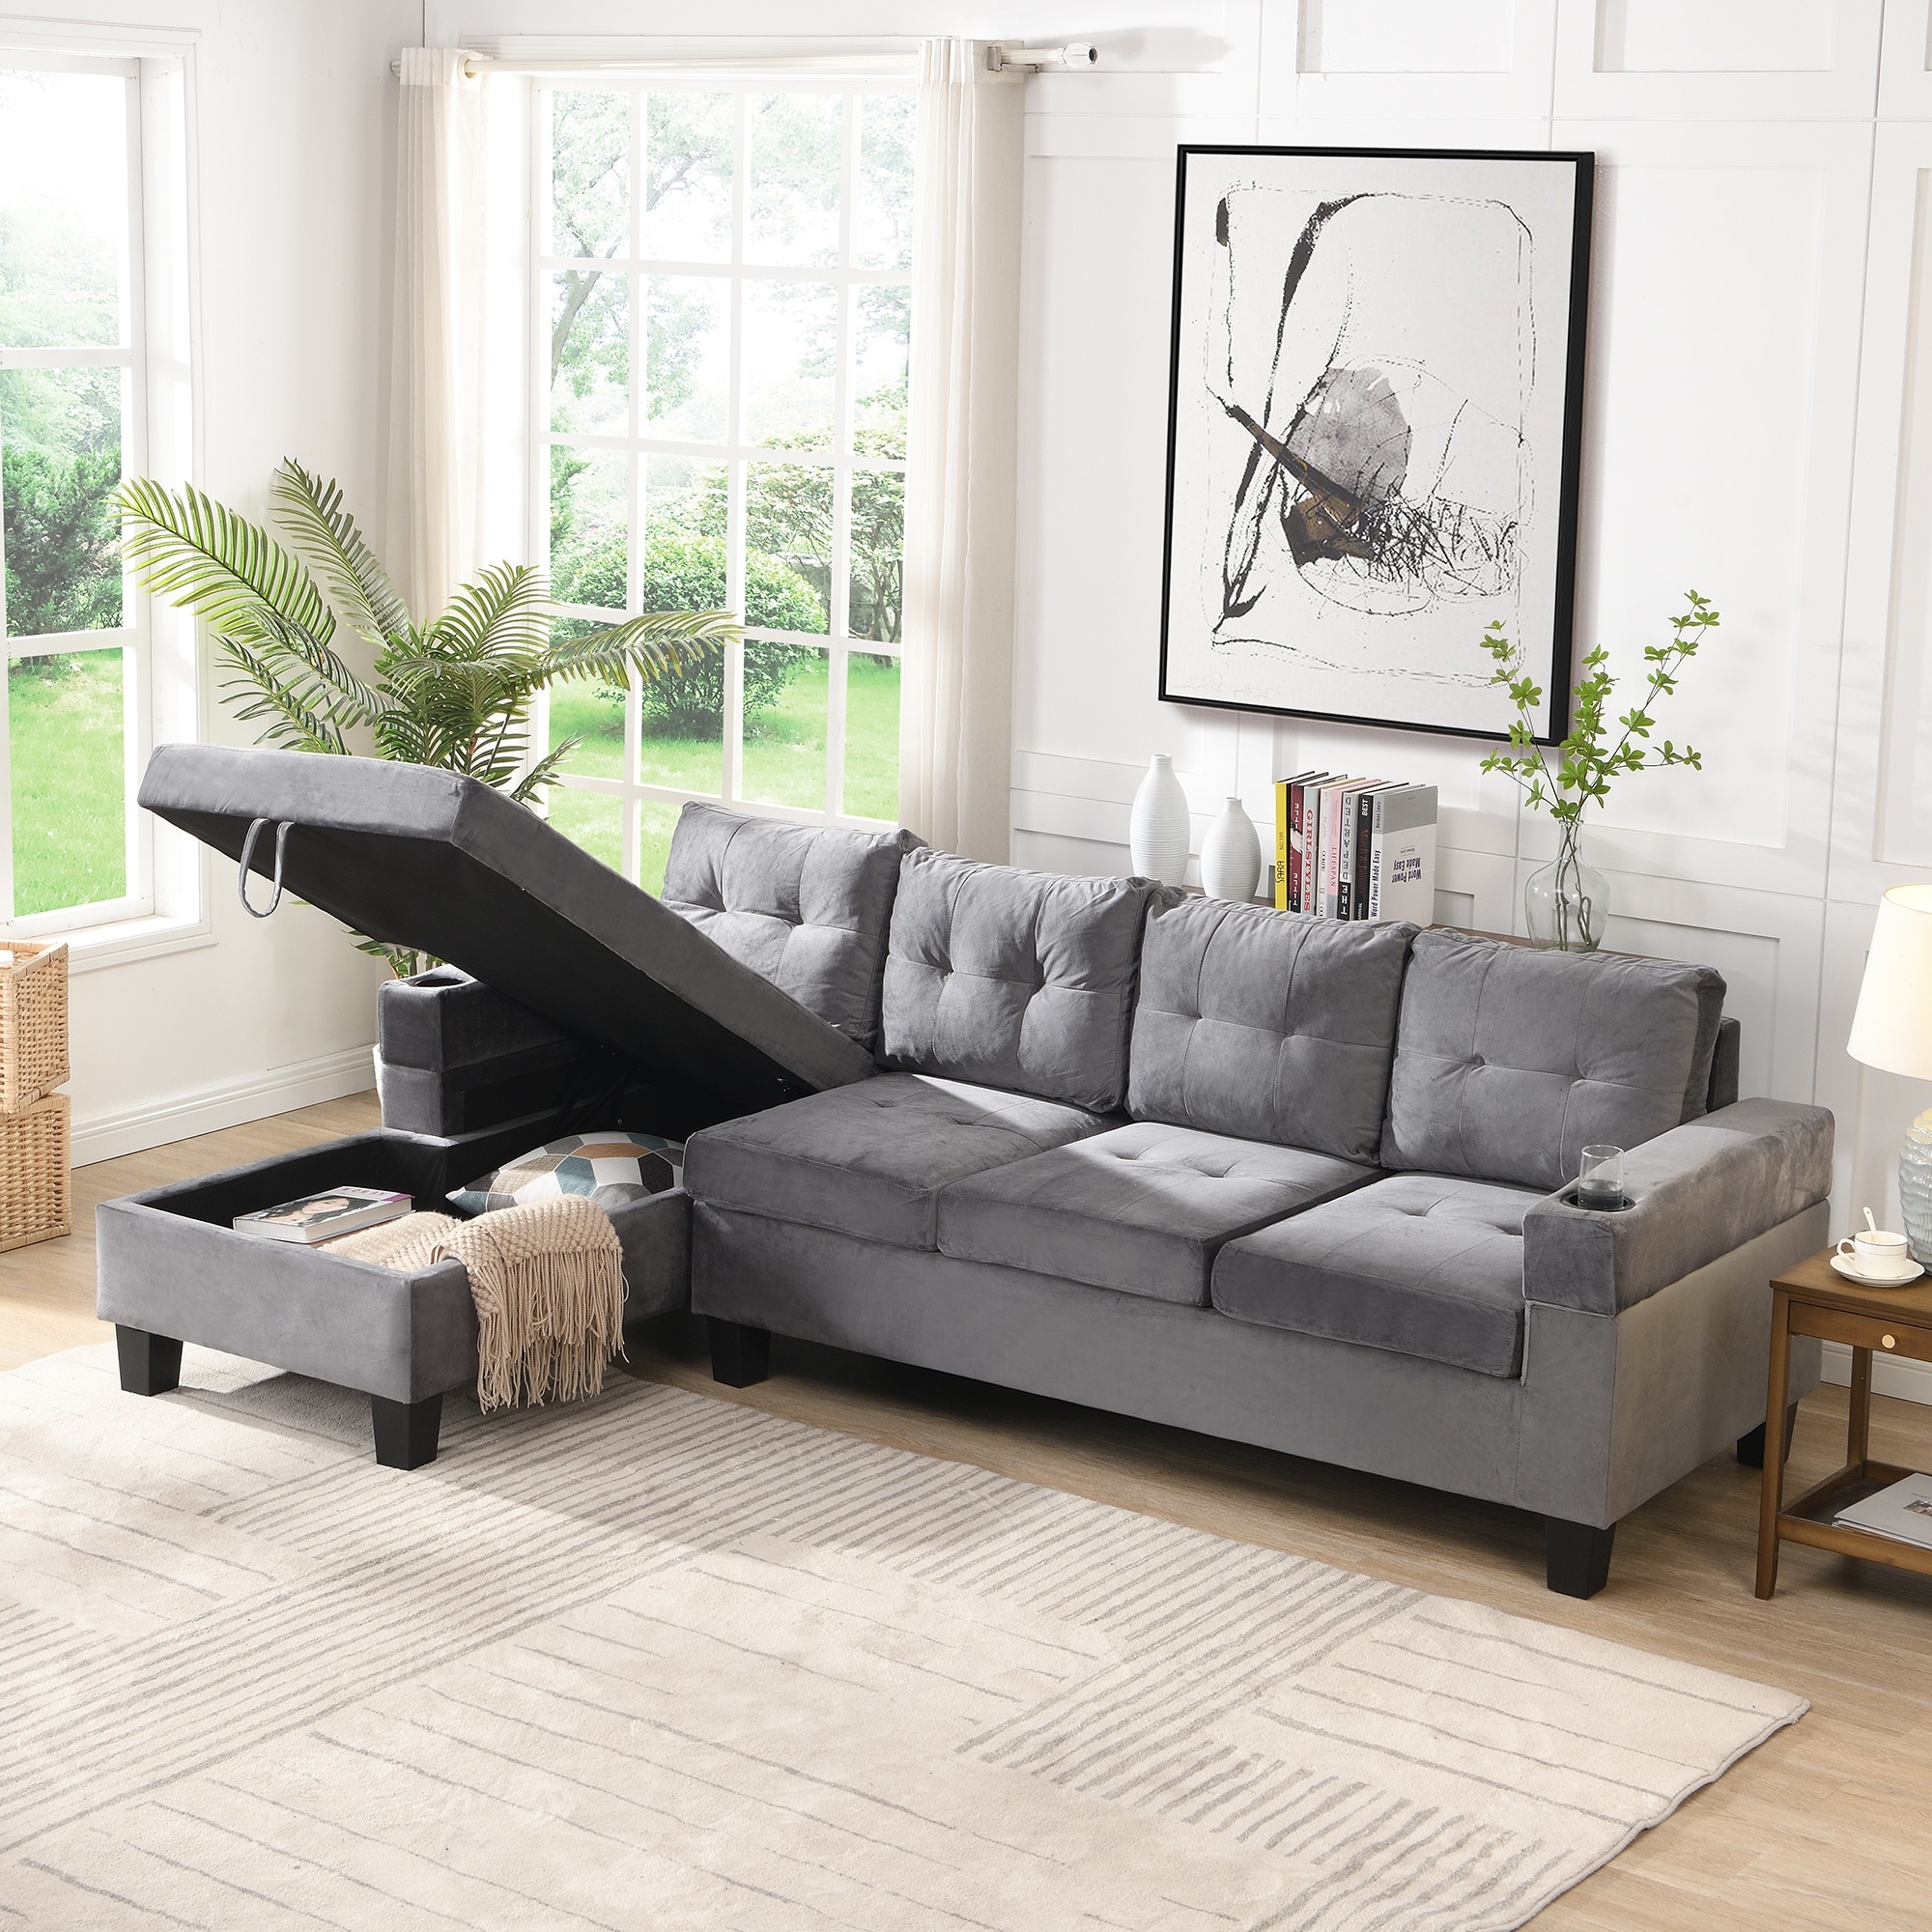 L-shape 4 Seat Sofa Set Grey Velvet Couch with Cupholder & Storage